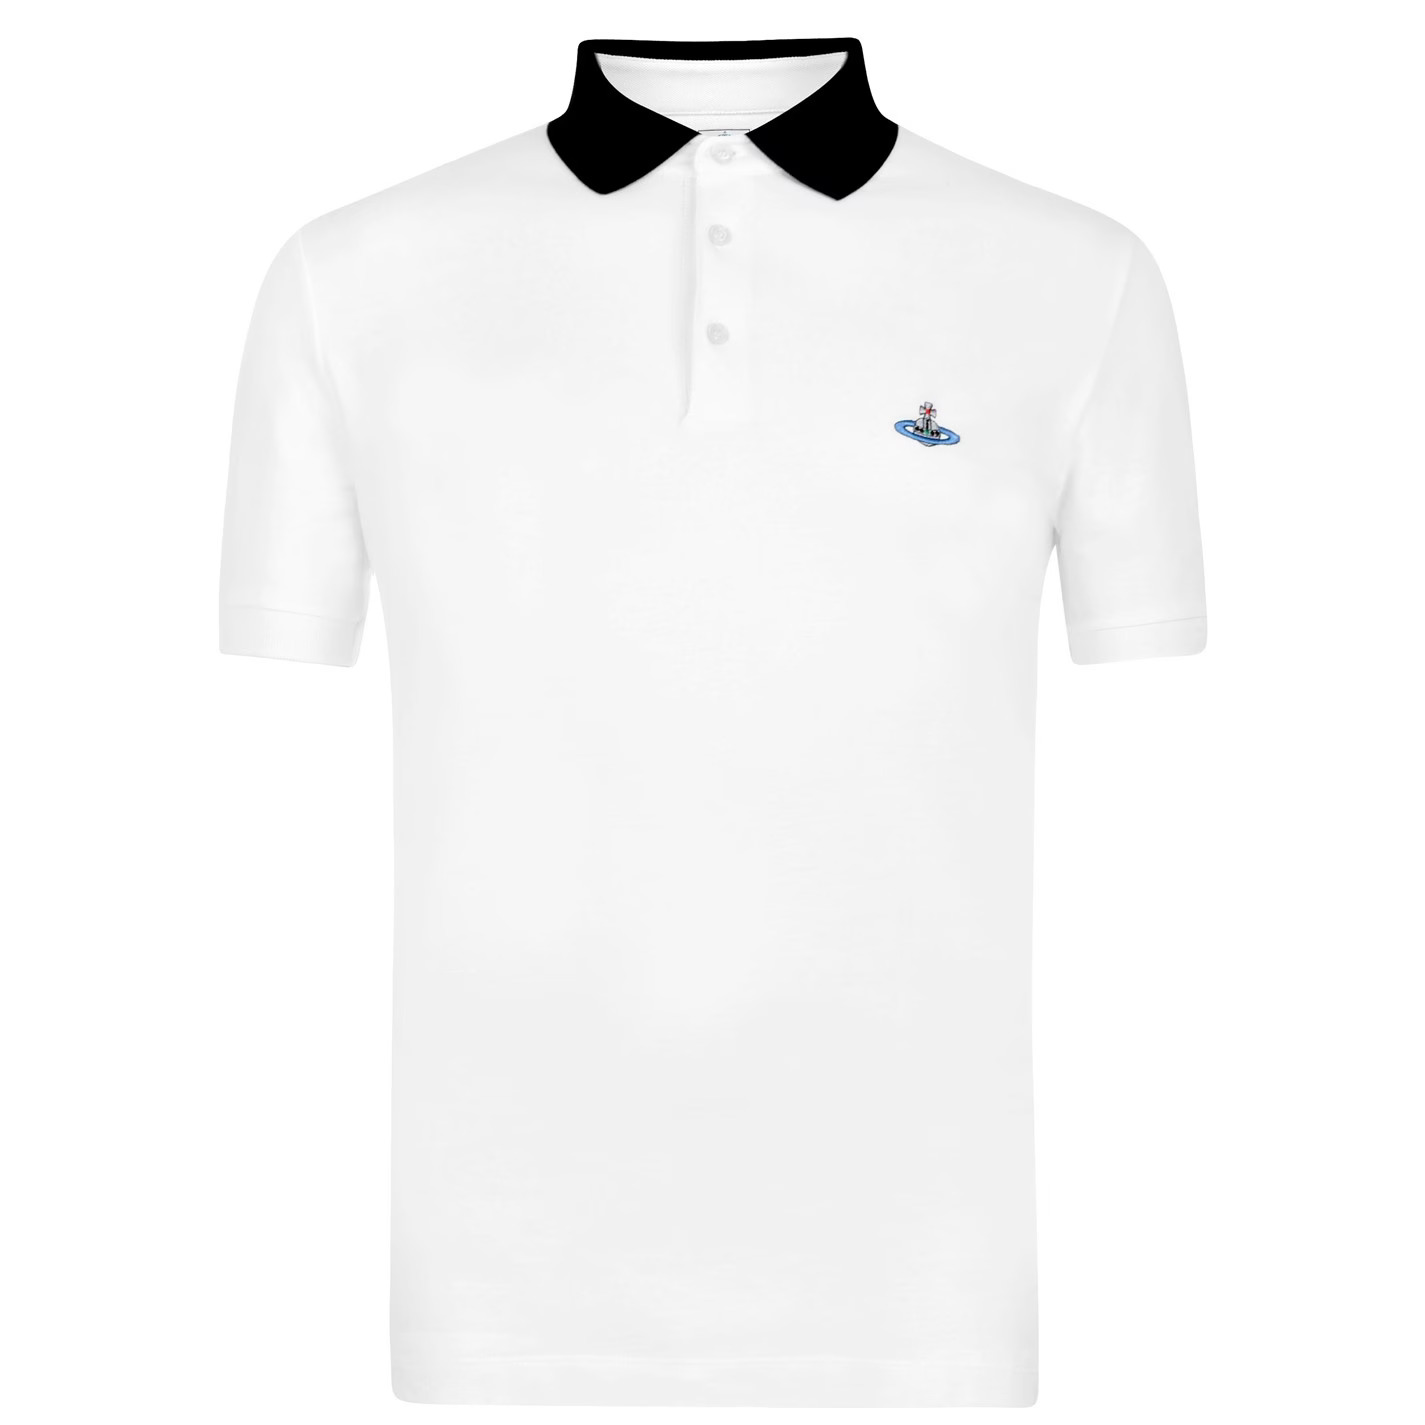 Vivienne Westwood White Contrasting Collar Polo Shirt | The Rainy Days